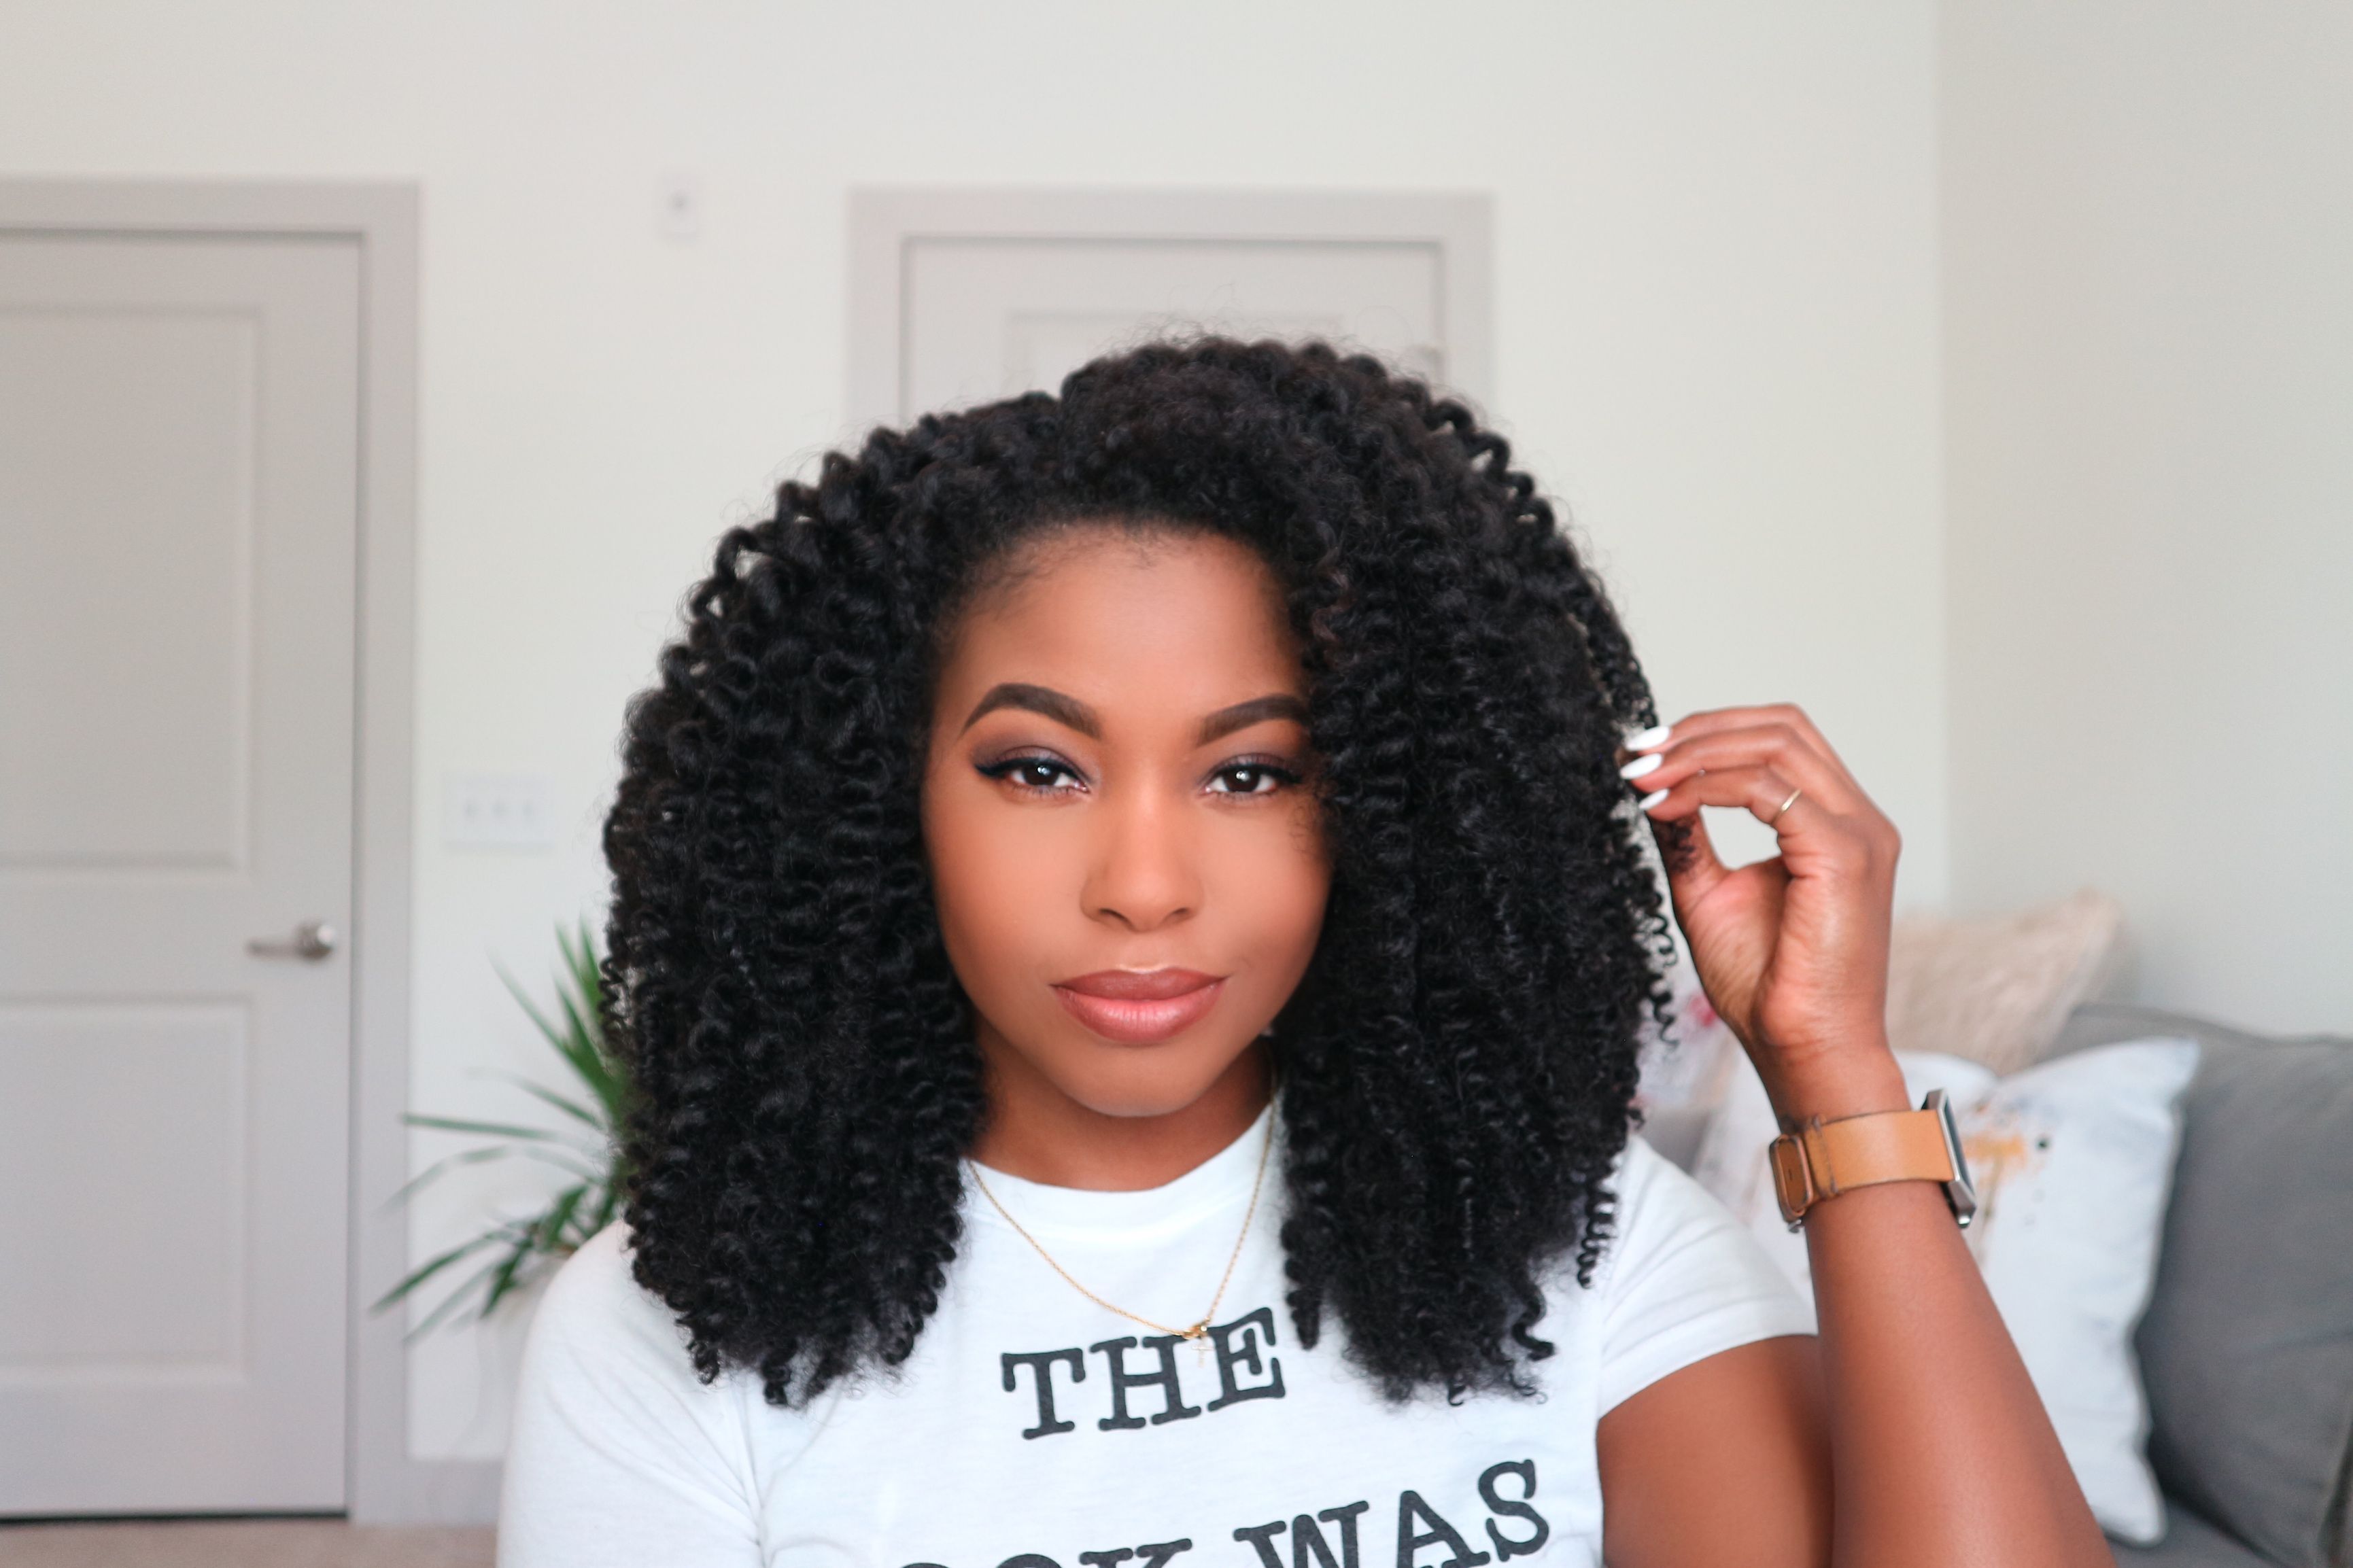 7 Crochet Braids Hairstyles Preferred By the Female Group